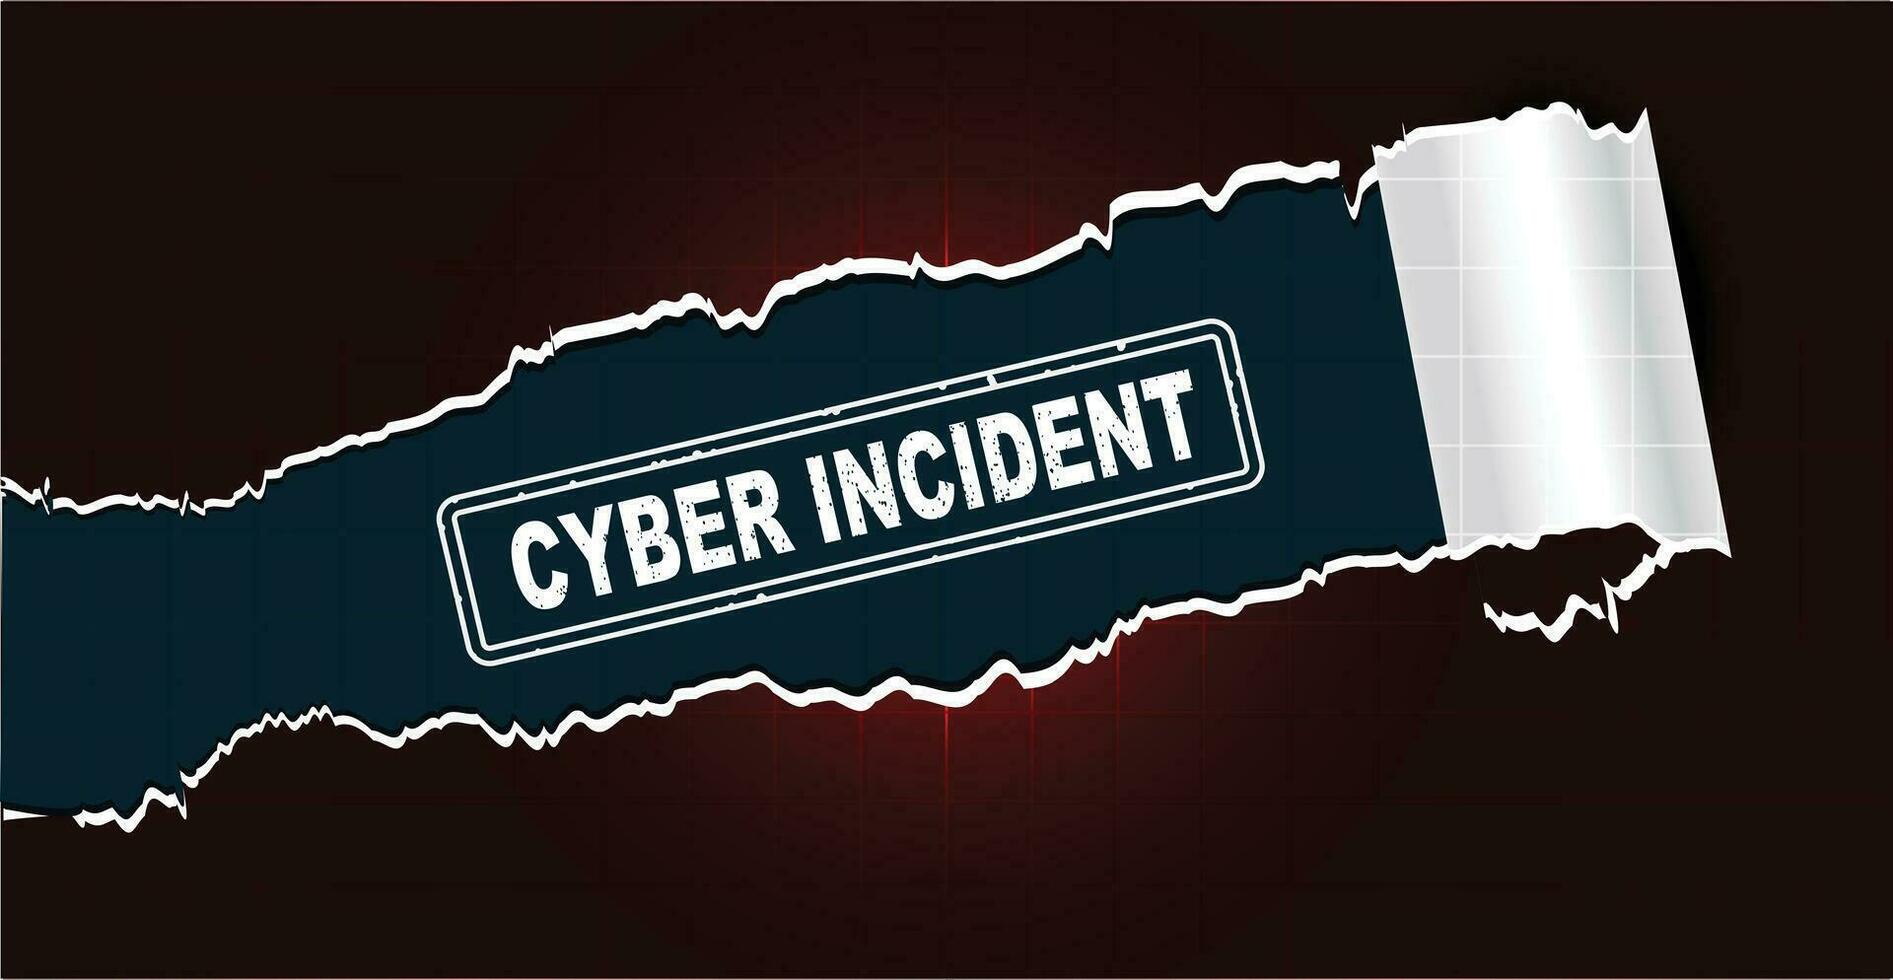 Cyber Incident security concept illustration vector